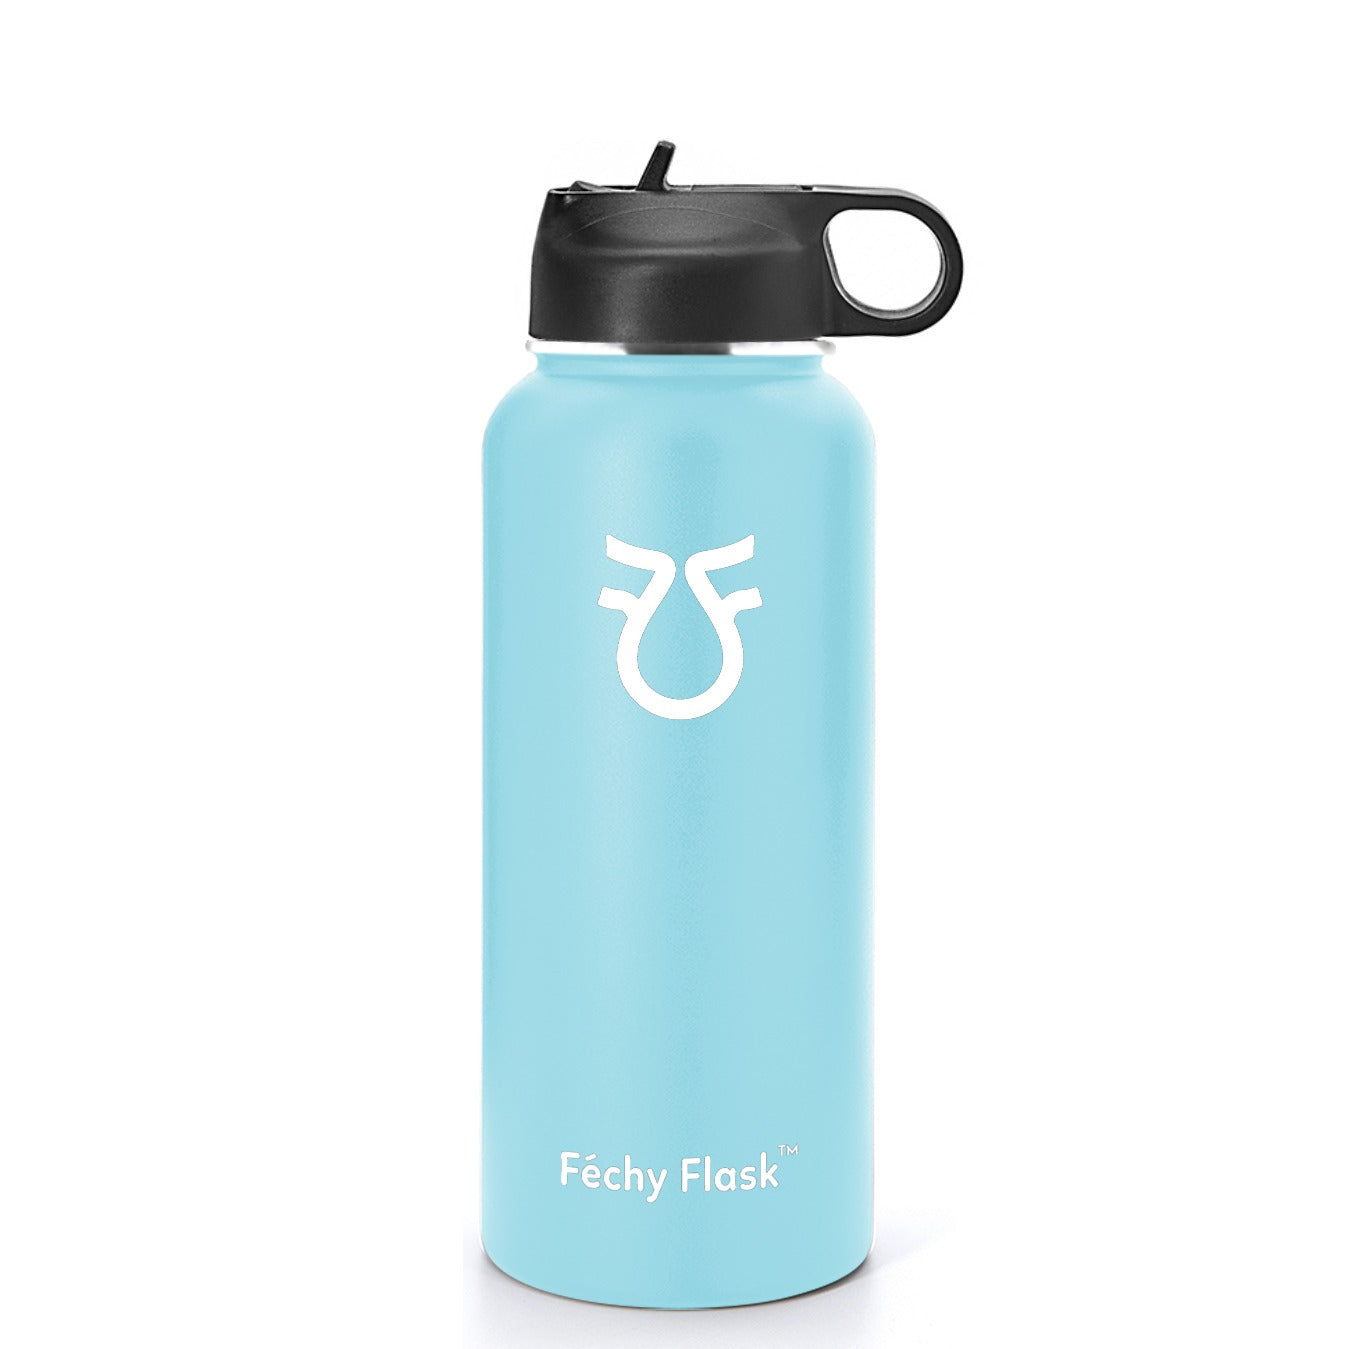 Fechy Stainless Steel insulated Drink Bottle - 1L - Pastel